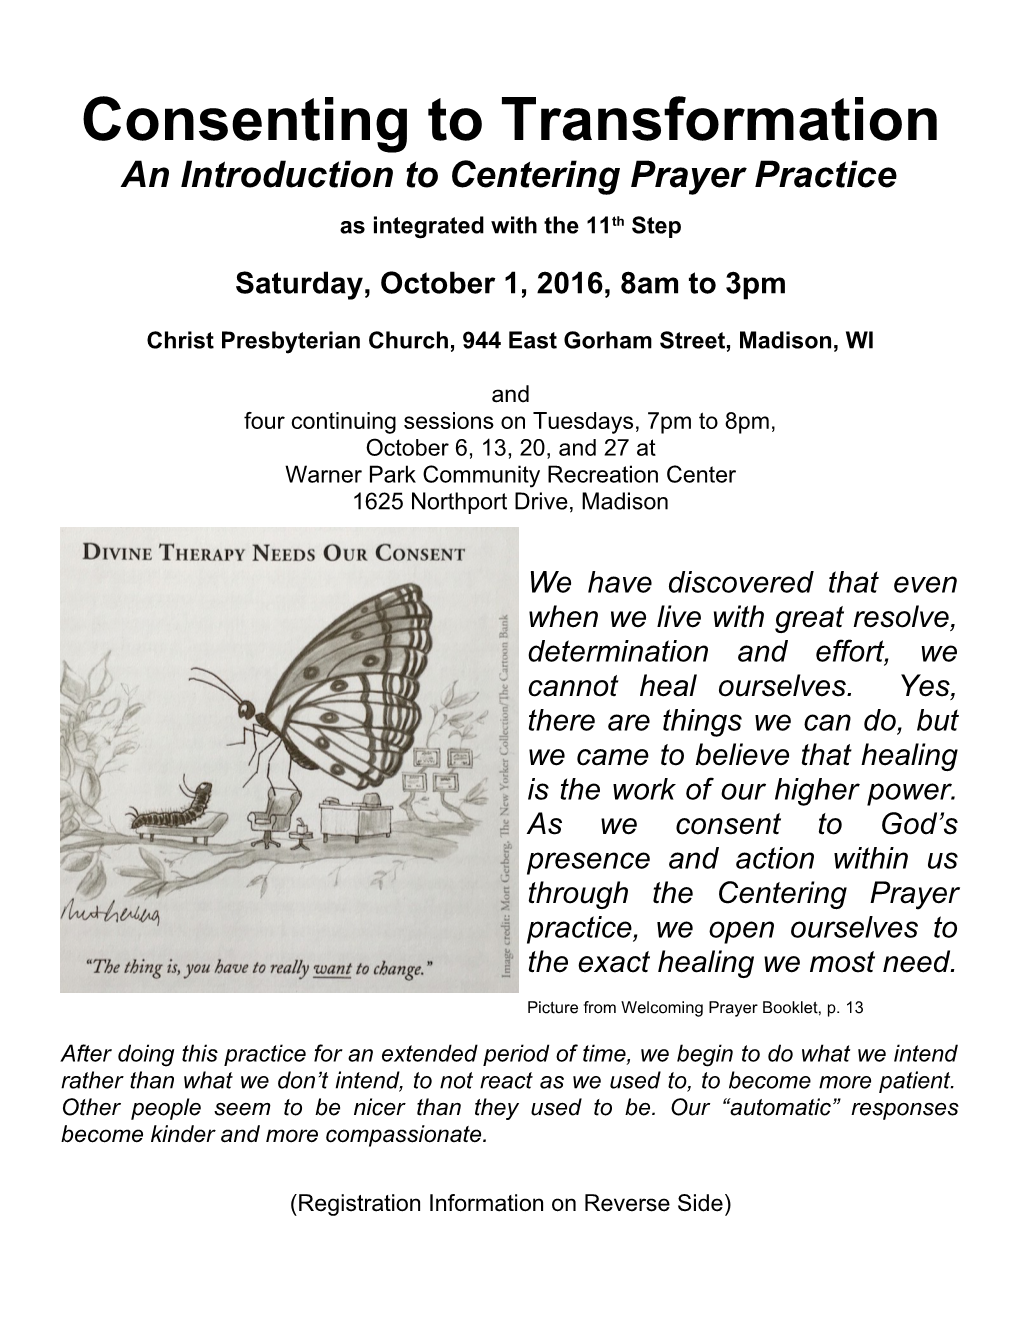 An Introduction to Centering Prayer Practice